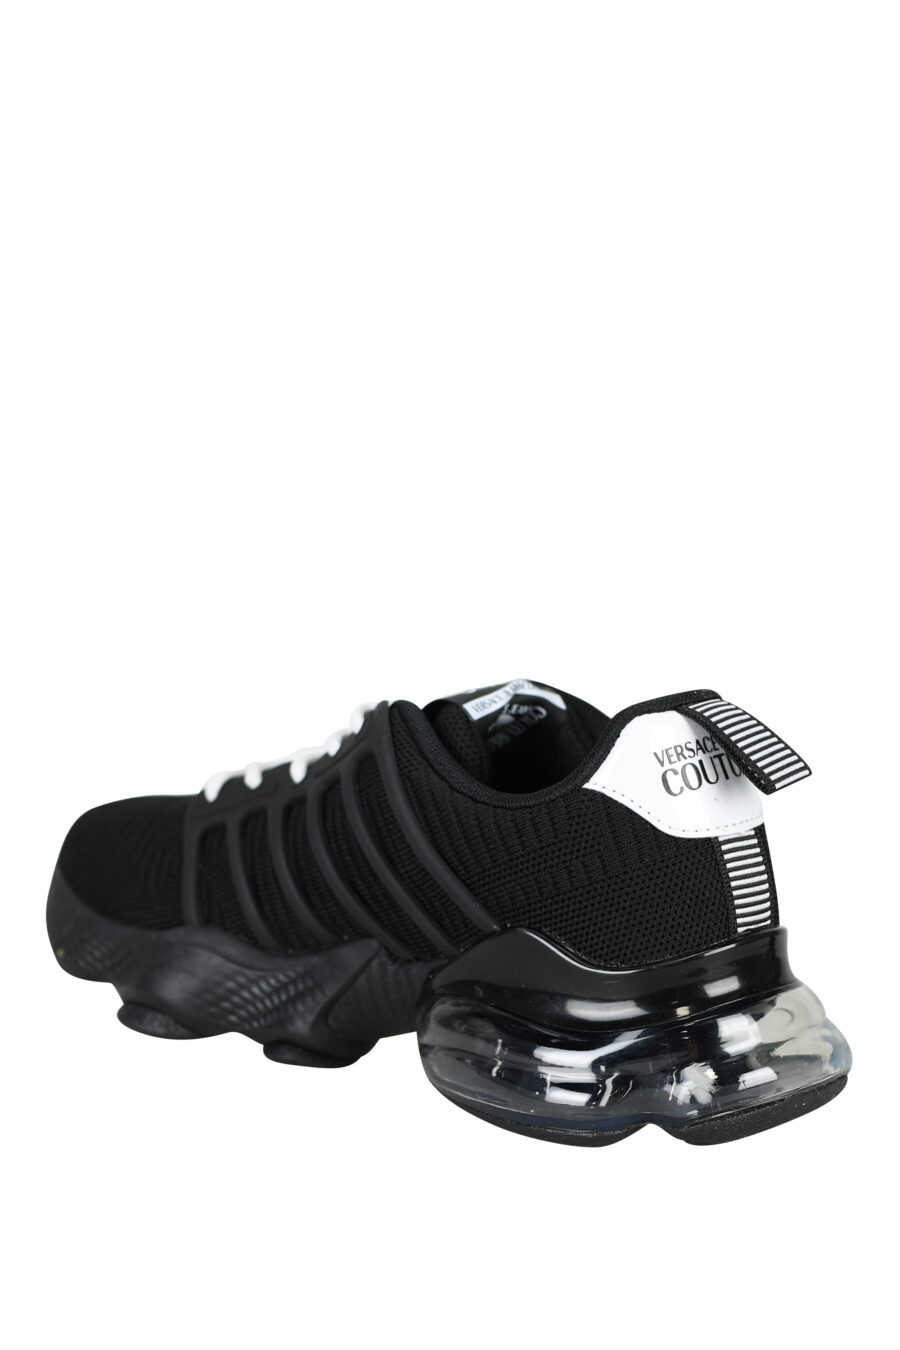 Black trainers with vertical maxilogo and crossed laces - 8052019484915 3